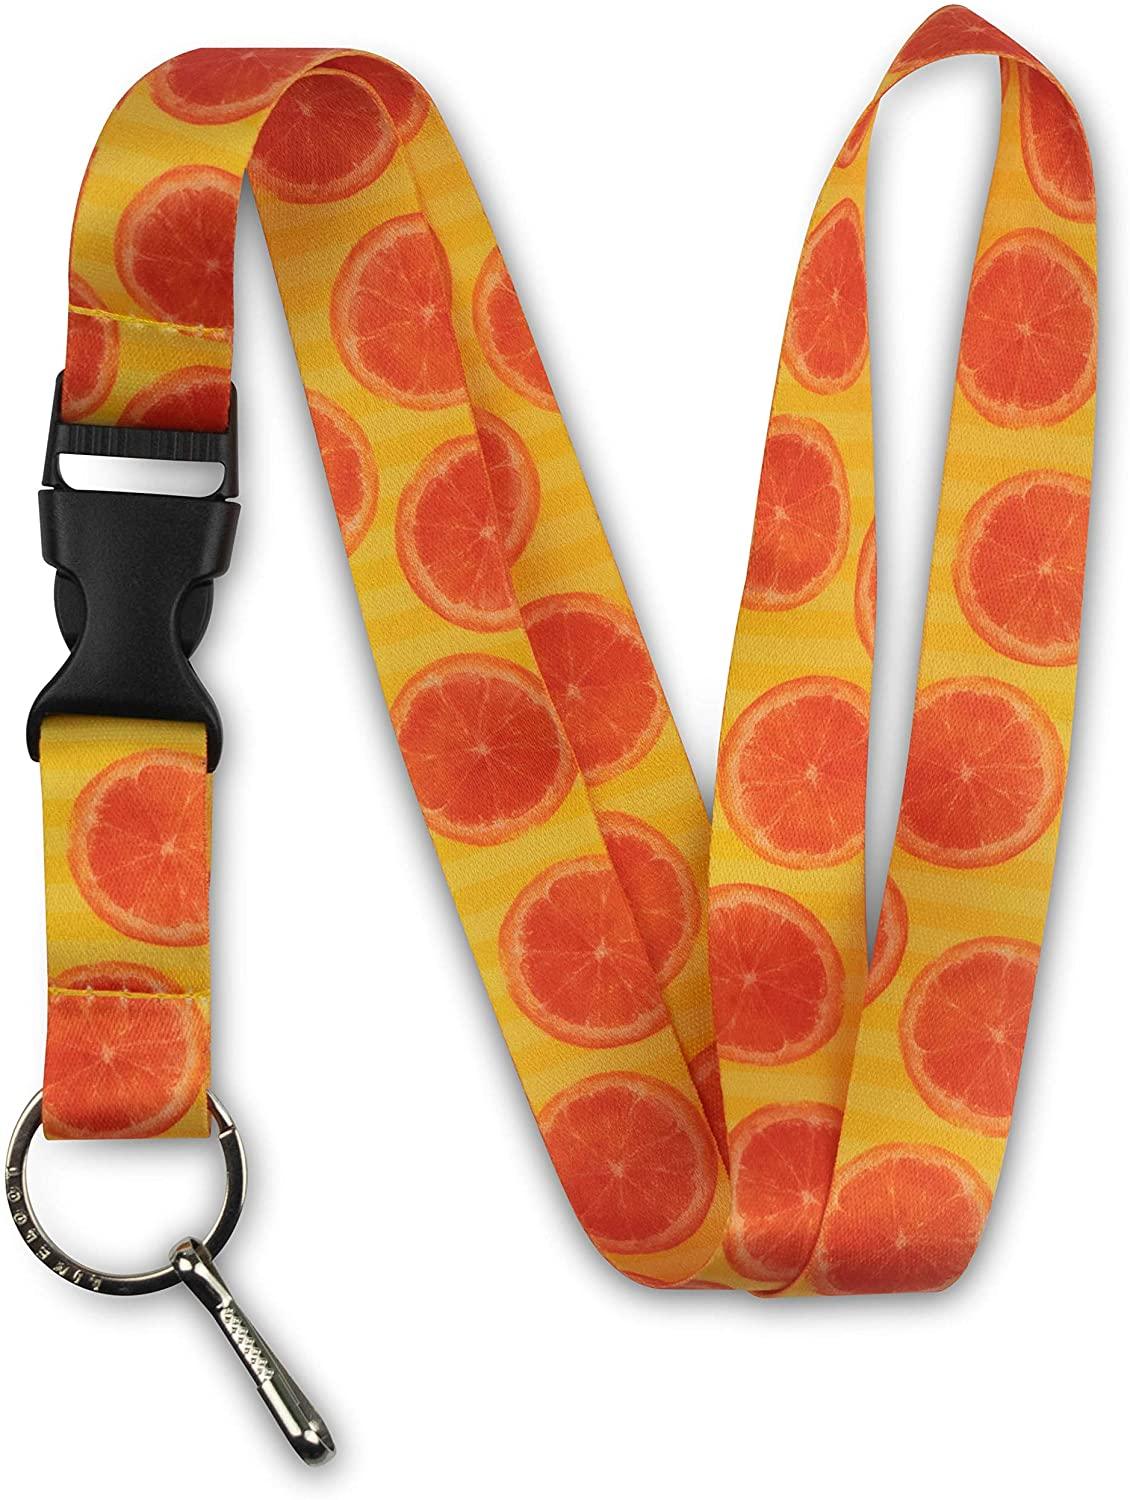 Fruit Collection Lanyards - Limeloot